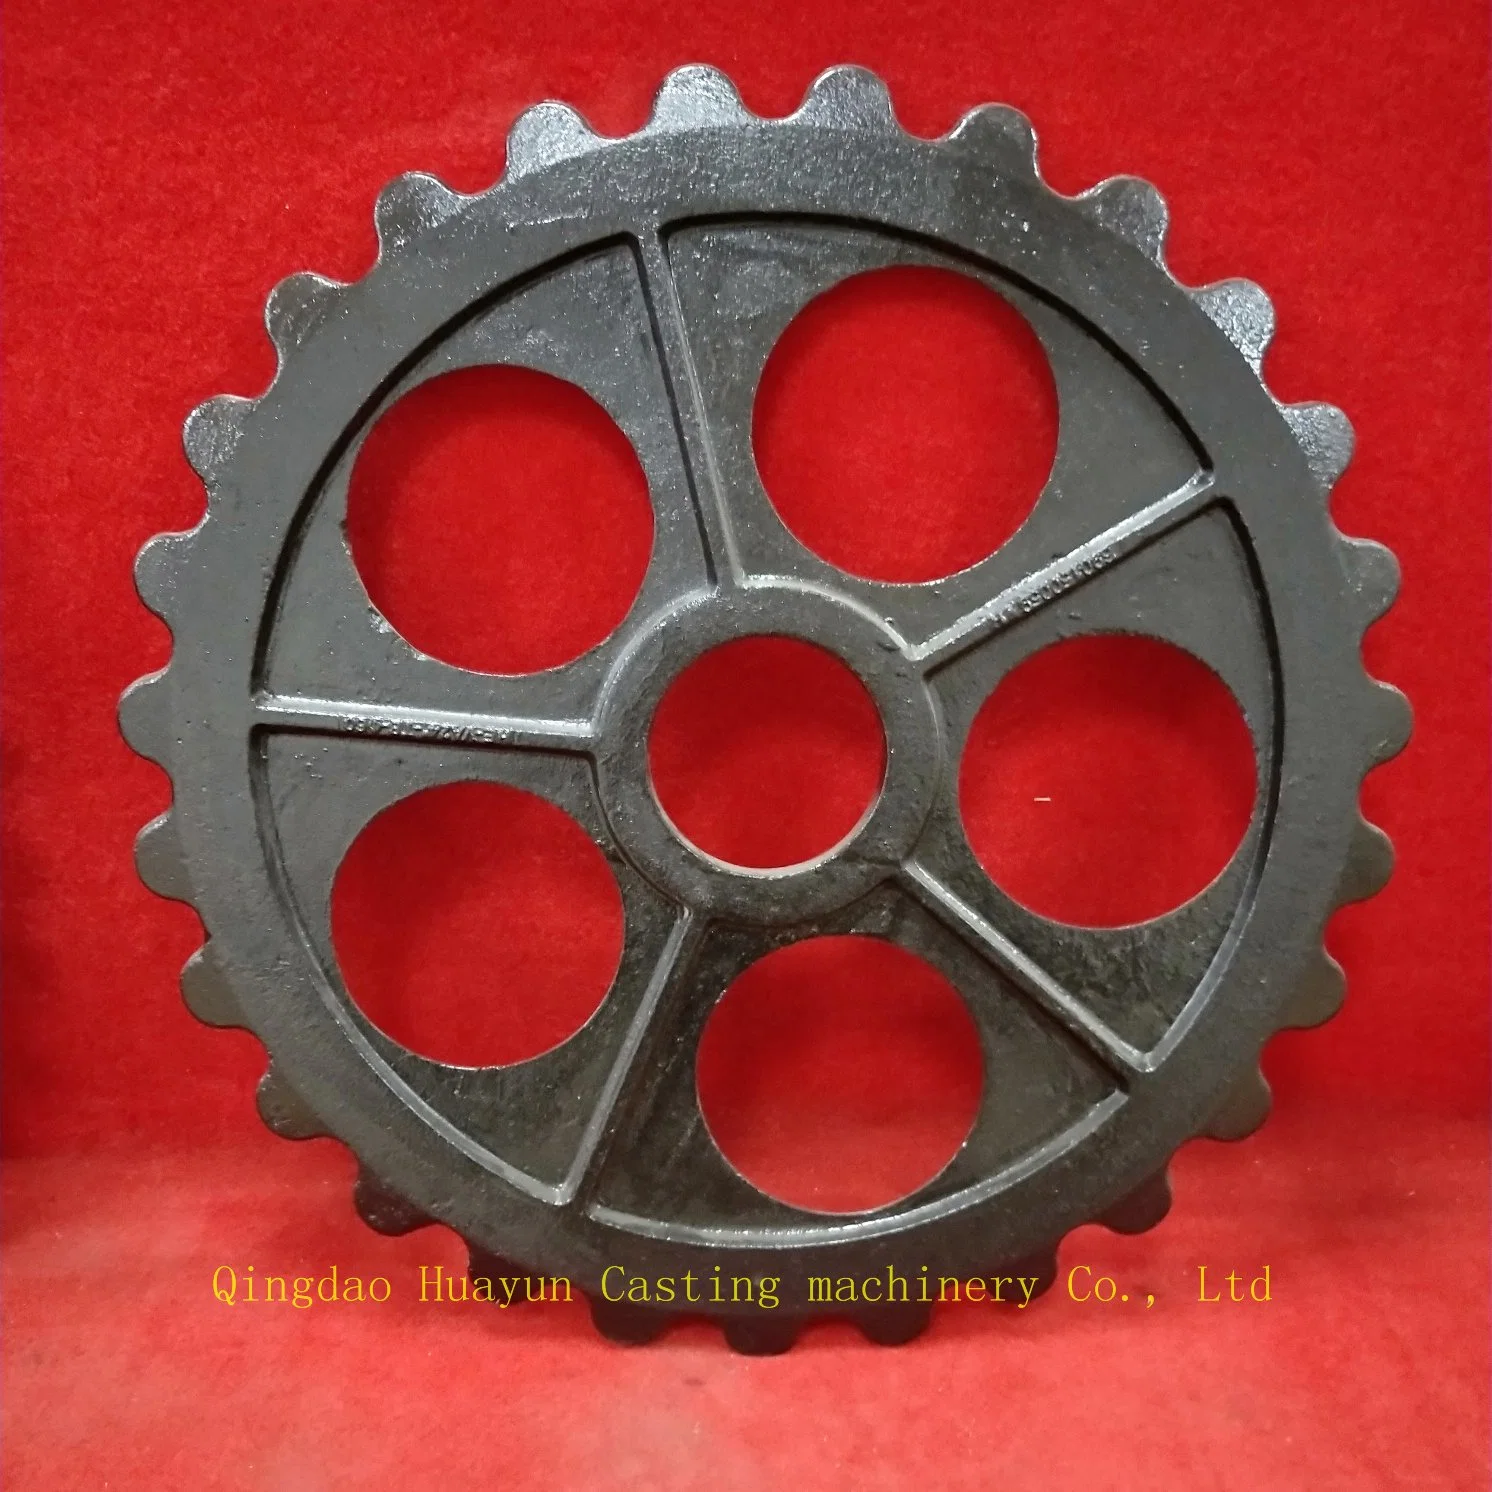 Agricultural Cast Iron Press Rings